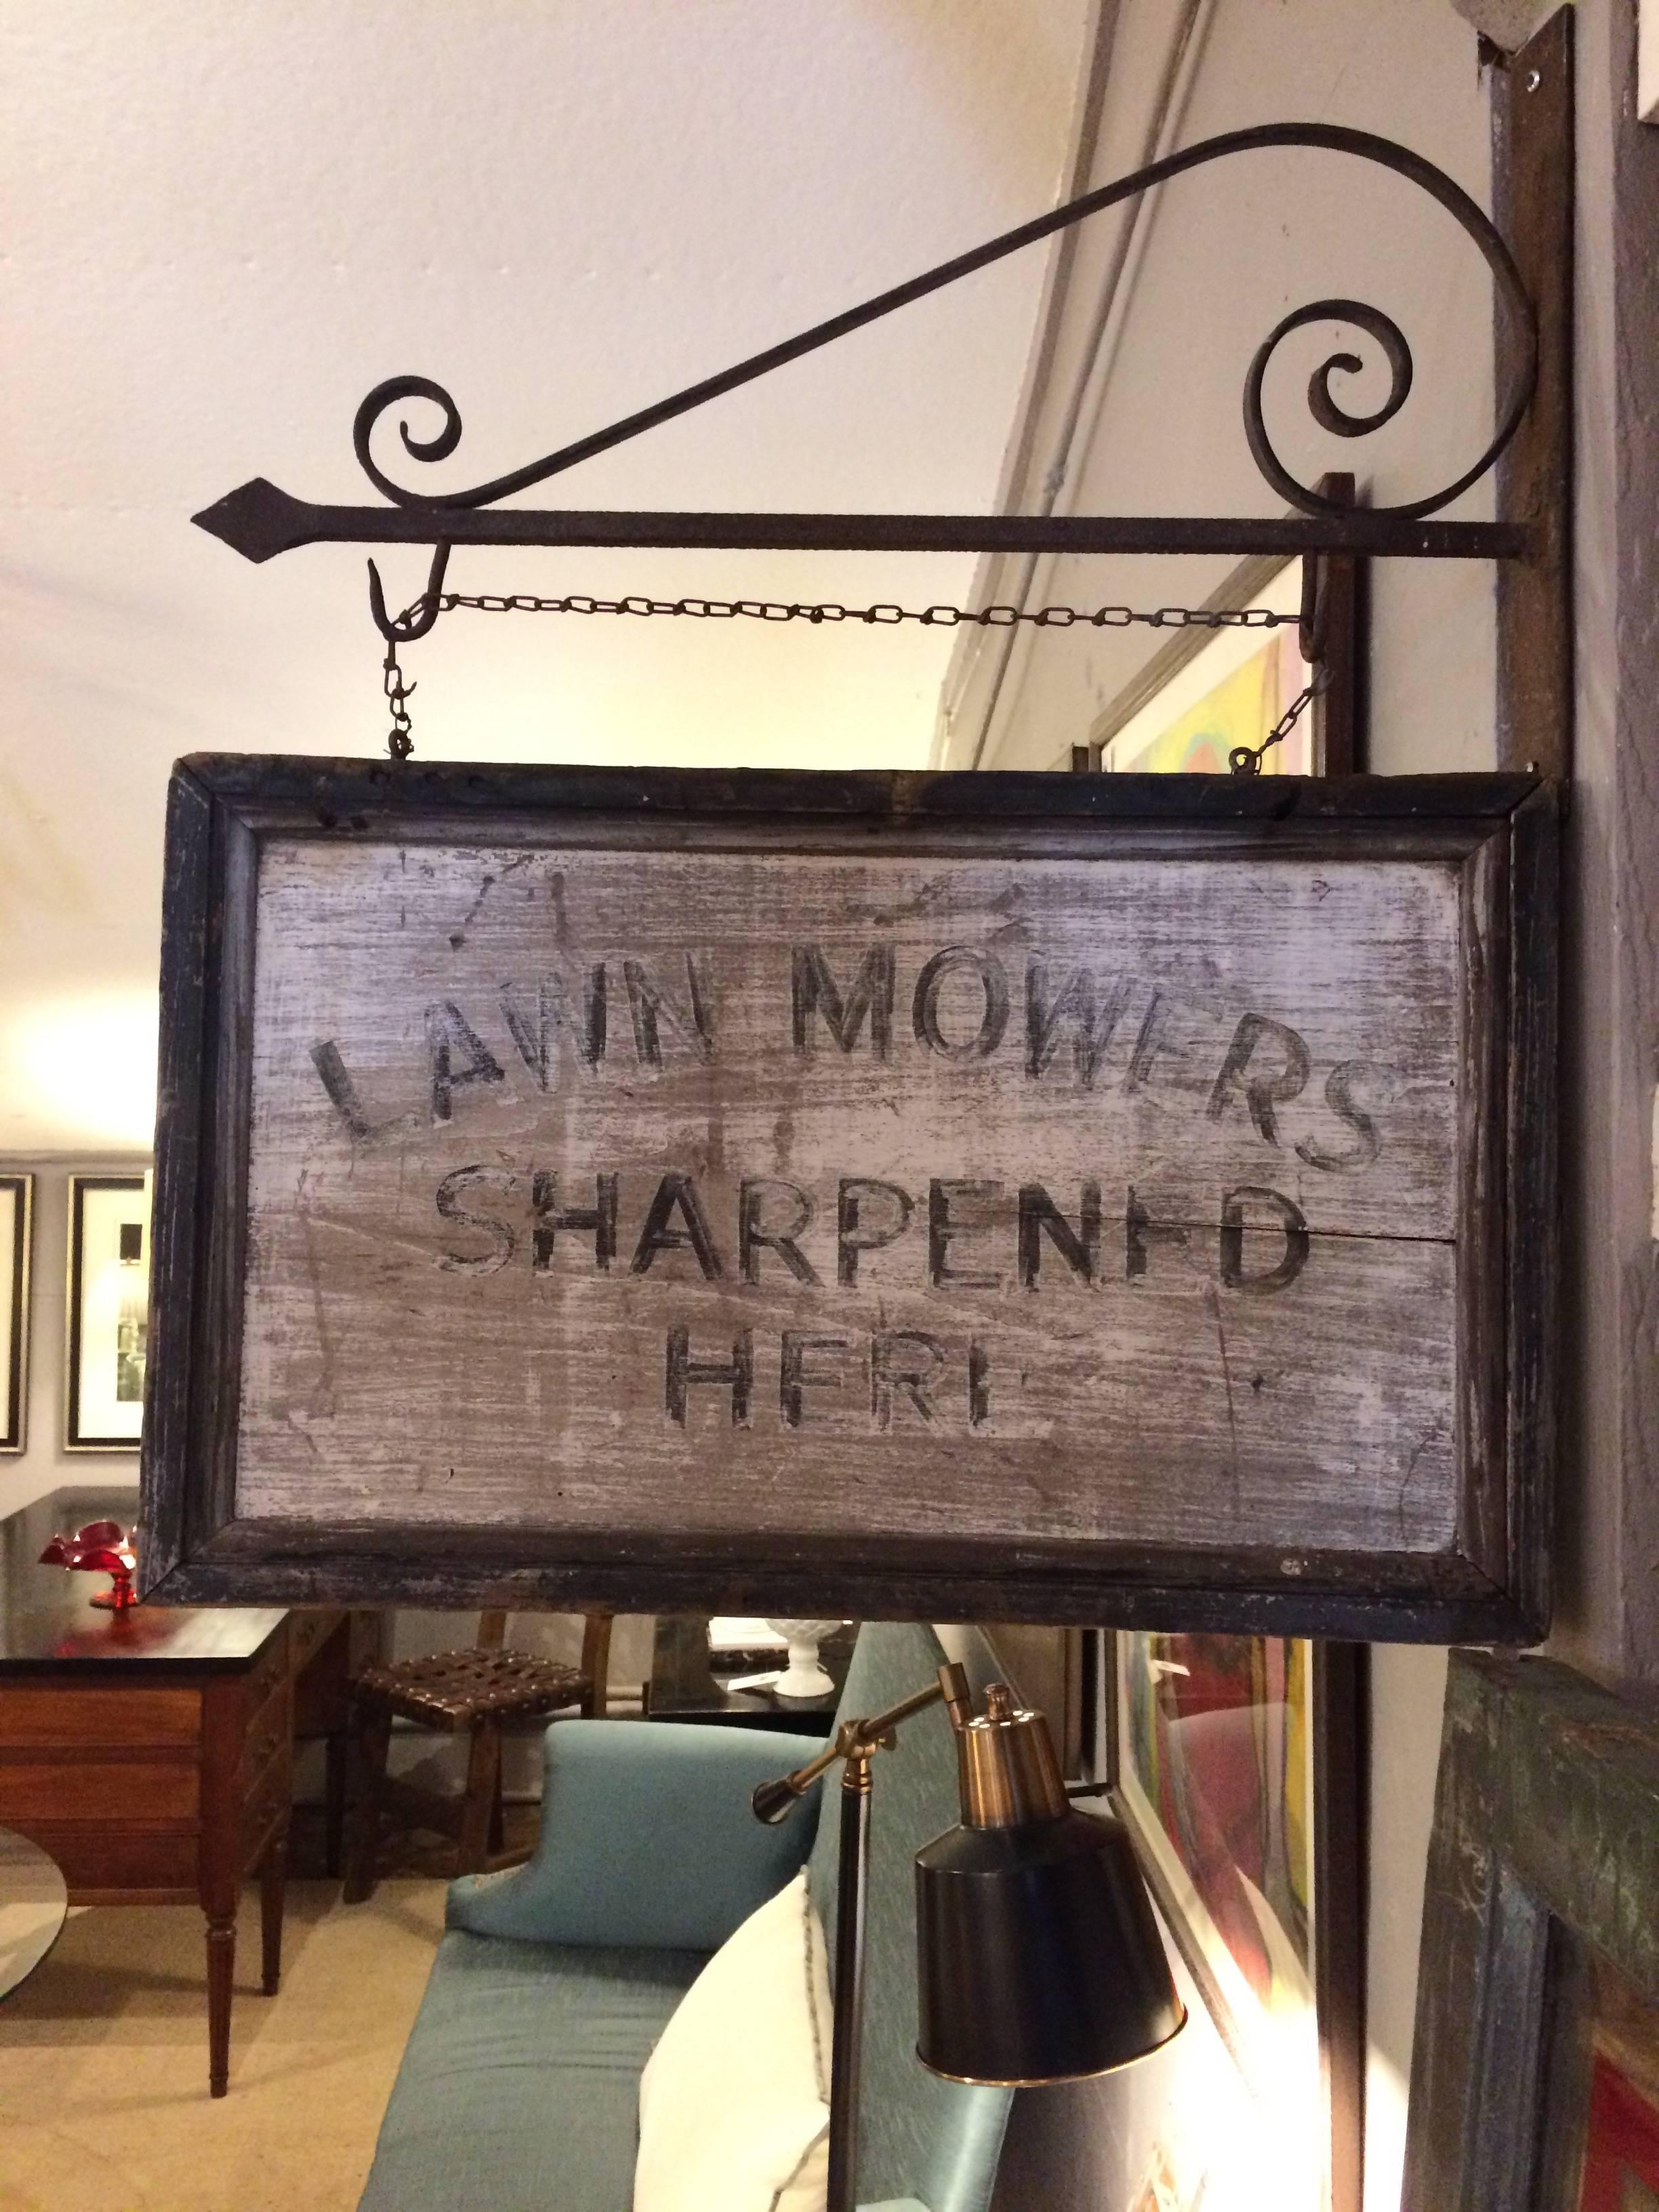 For the Folk Art lover who wants to add some charm and funk with a found vintage two sided sign that says Lawn Mowers Sharpened Here. Wrought iron old sign hanger also included.
Measures: Sign is 24.5 W x 15 H x 2.25 D
With iron hanger: 24.5 W x